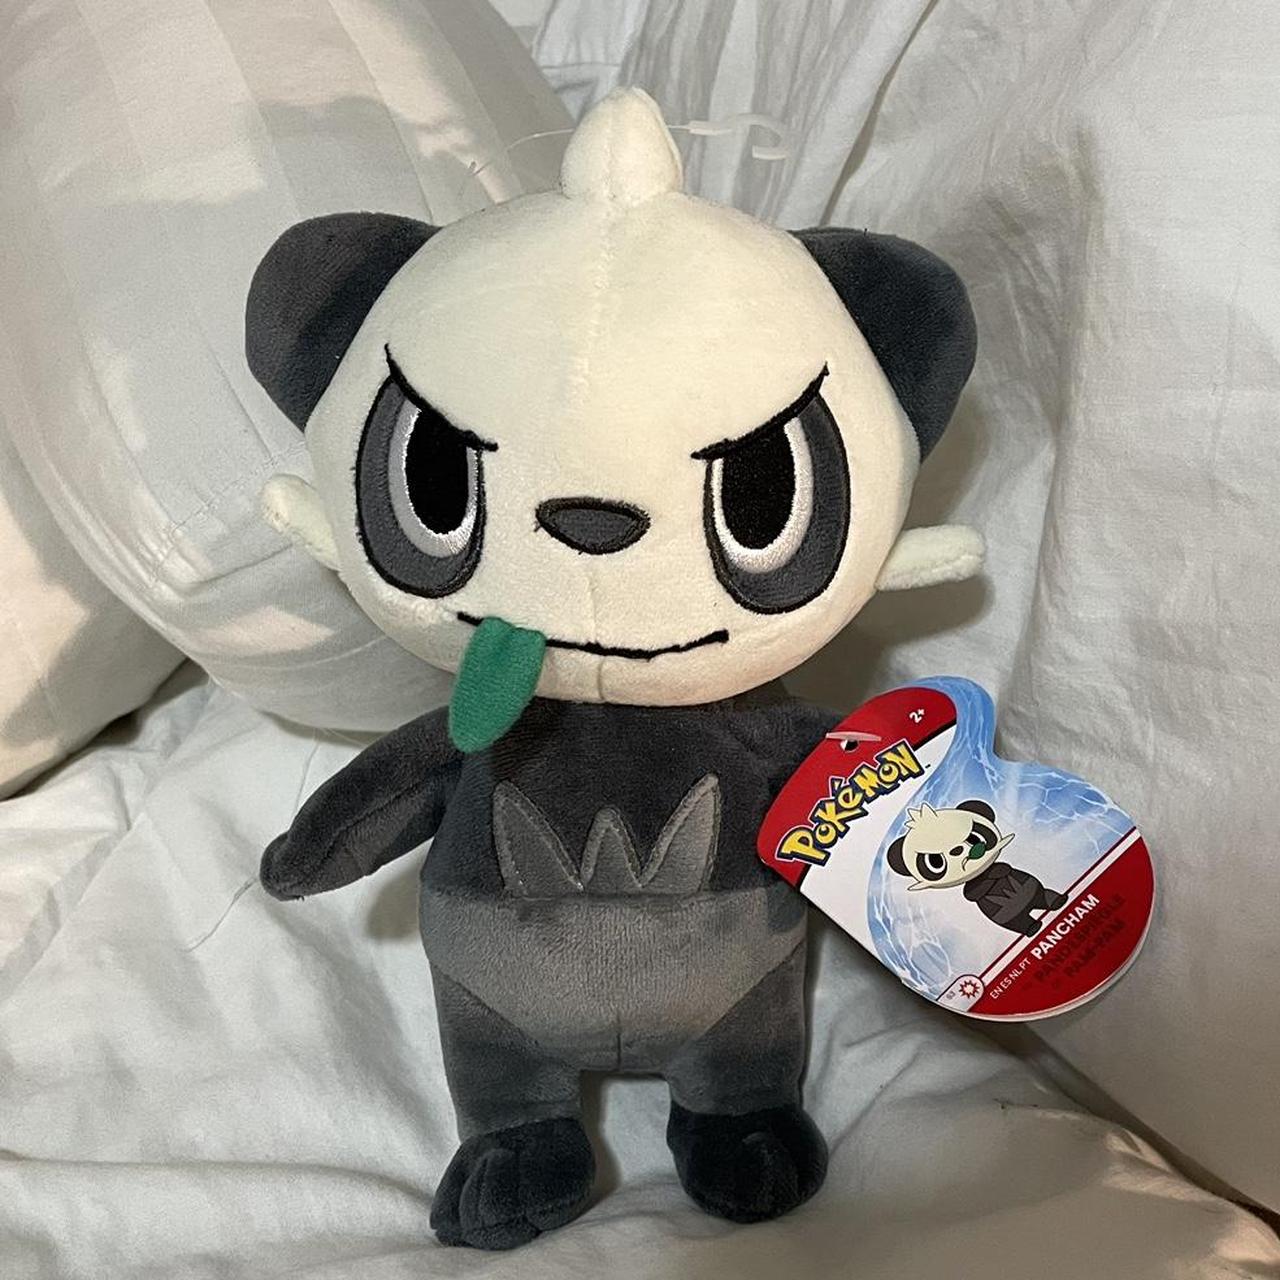 Download Pancham Holding Spoons Wallpaper | Wallpapers.com